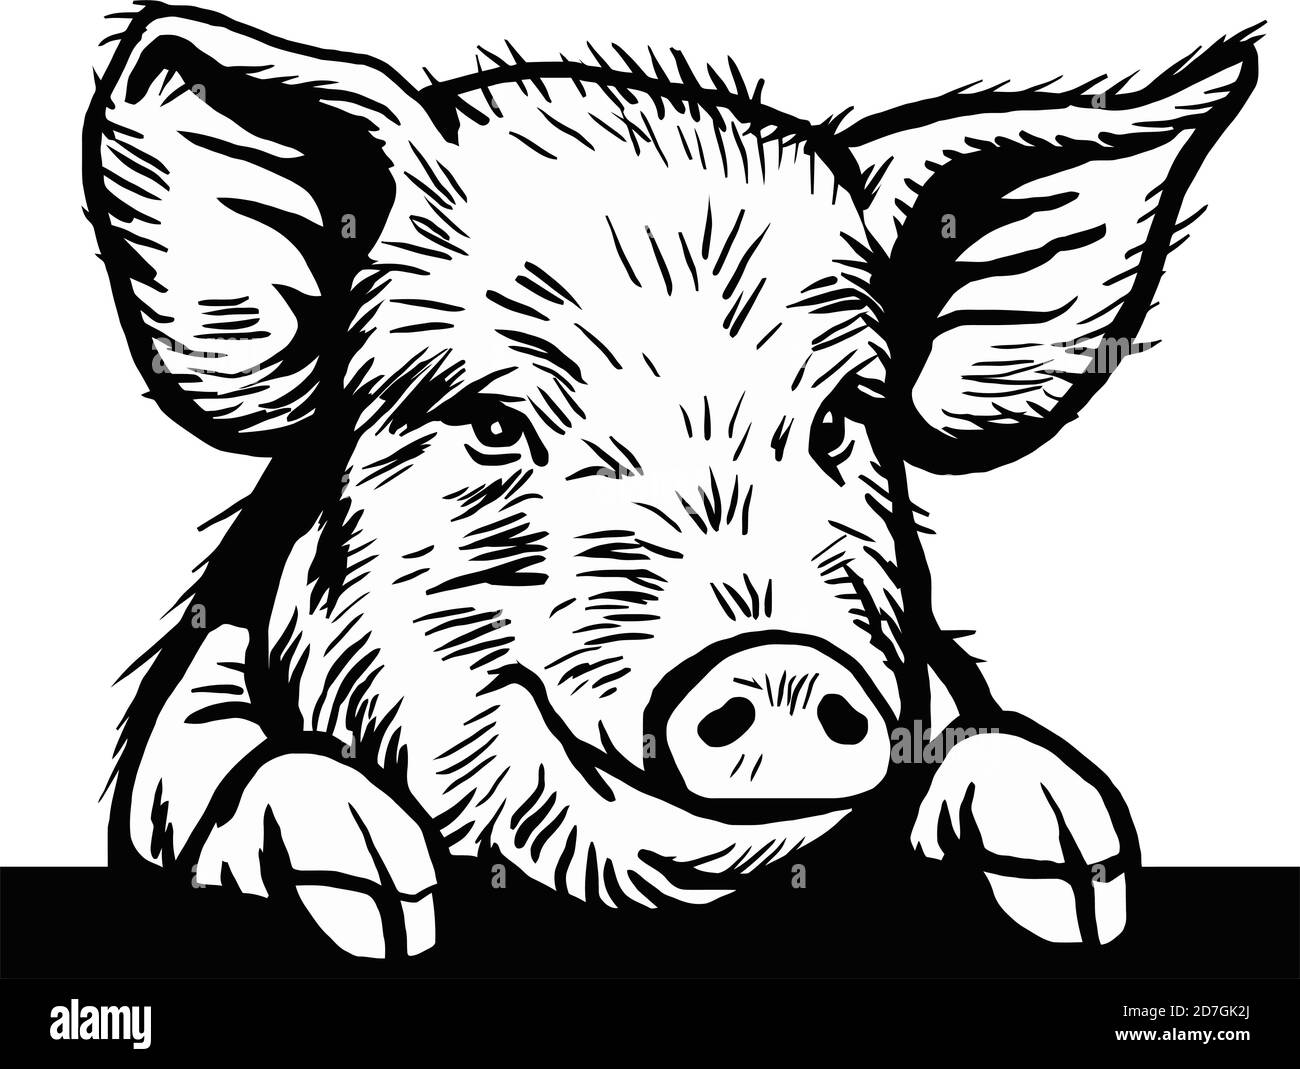 Peeking Pig head. Hand drawn sketch steak meat products with sausages and salami, pig farm fresh food, black and white vintage illustration Stock Vector